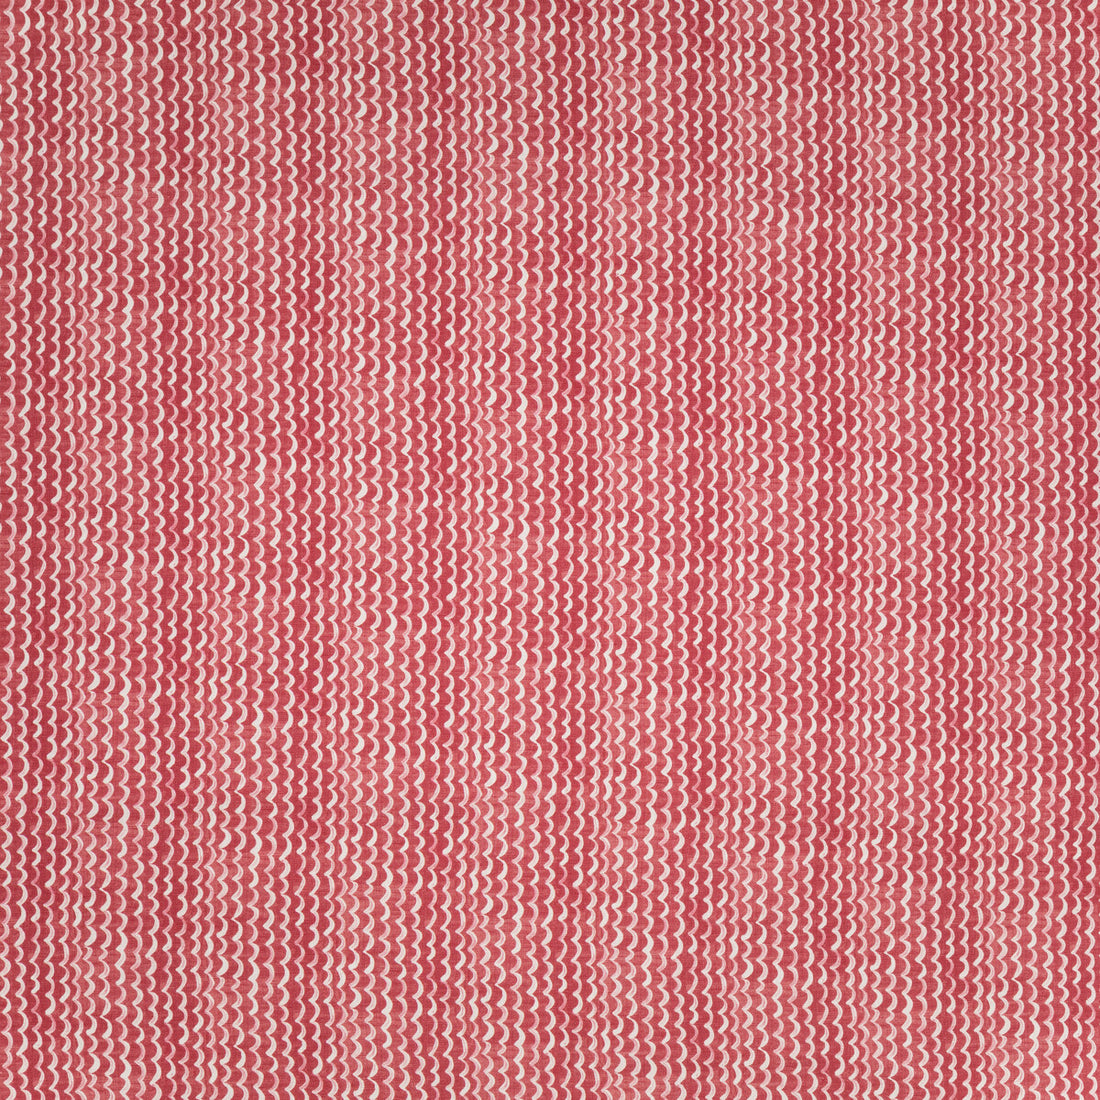 Camden fabric in raspberry color - pattern BFC-3704.97.0 - by Lee Jofa in the Blithfield Eden collection